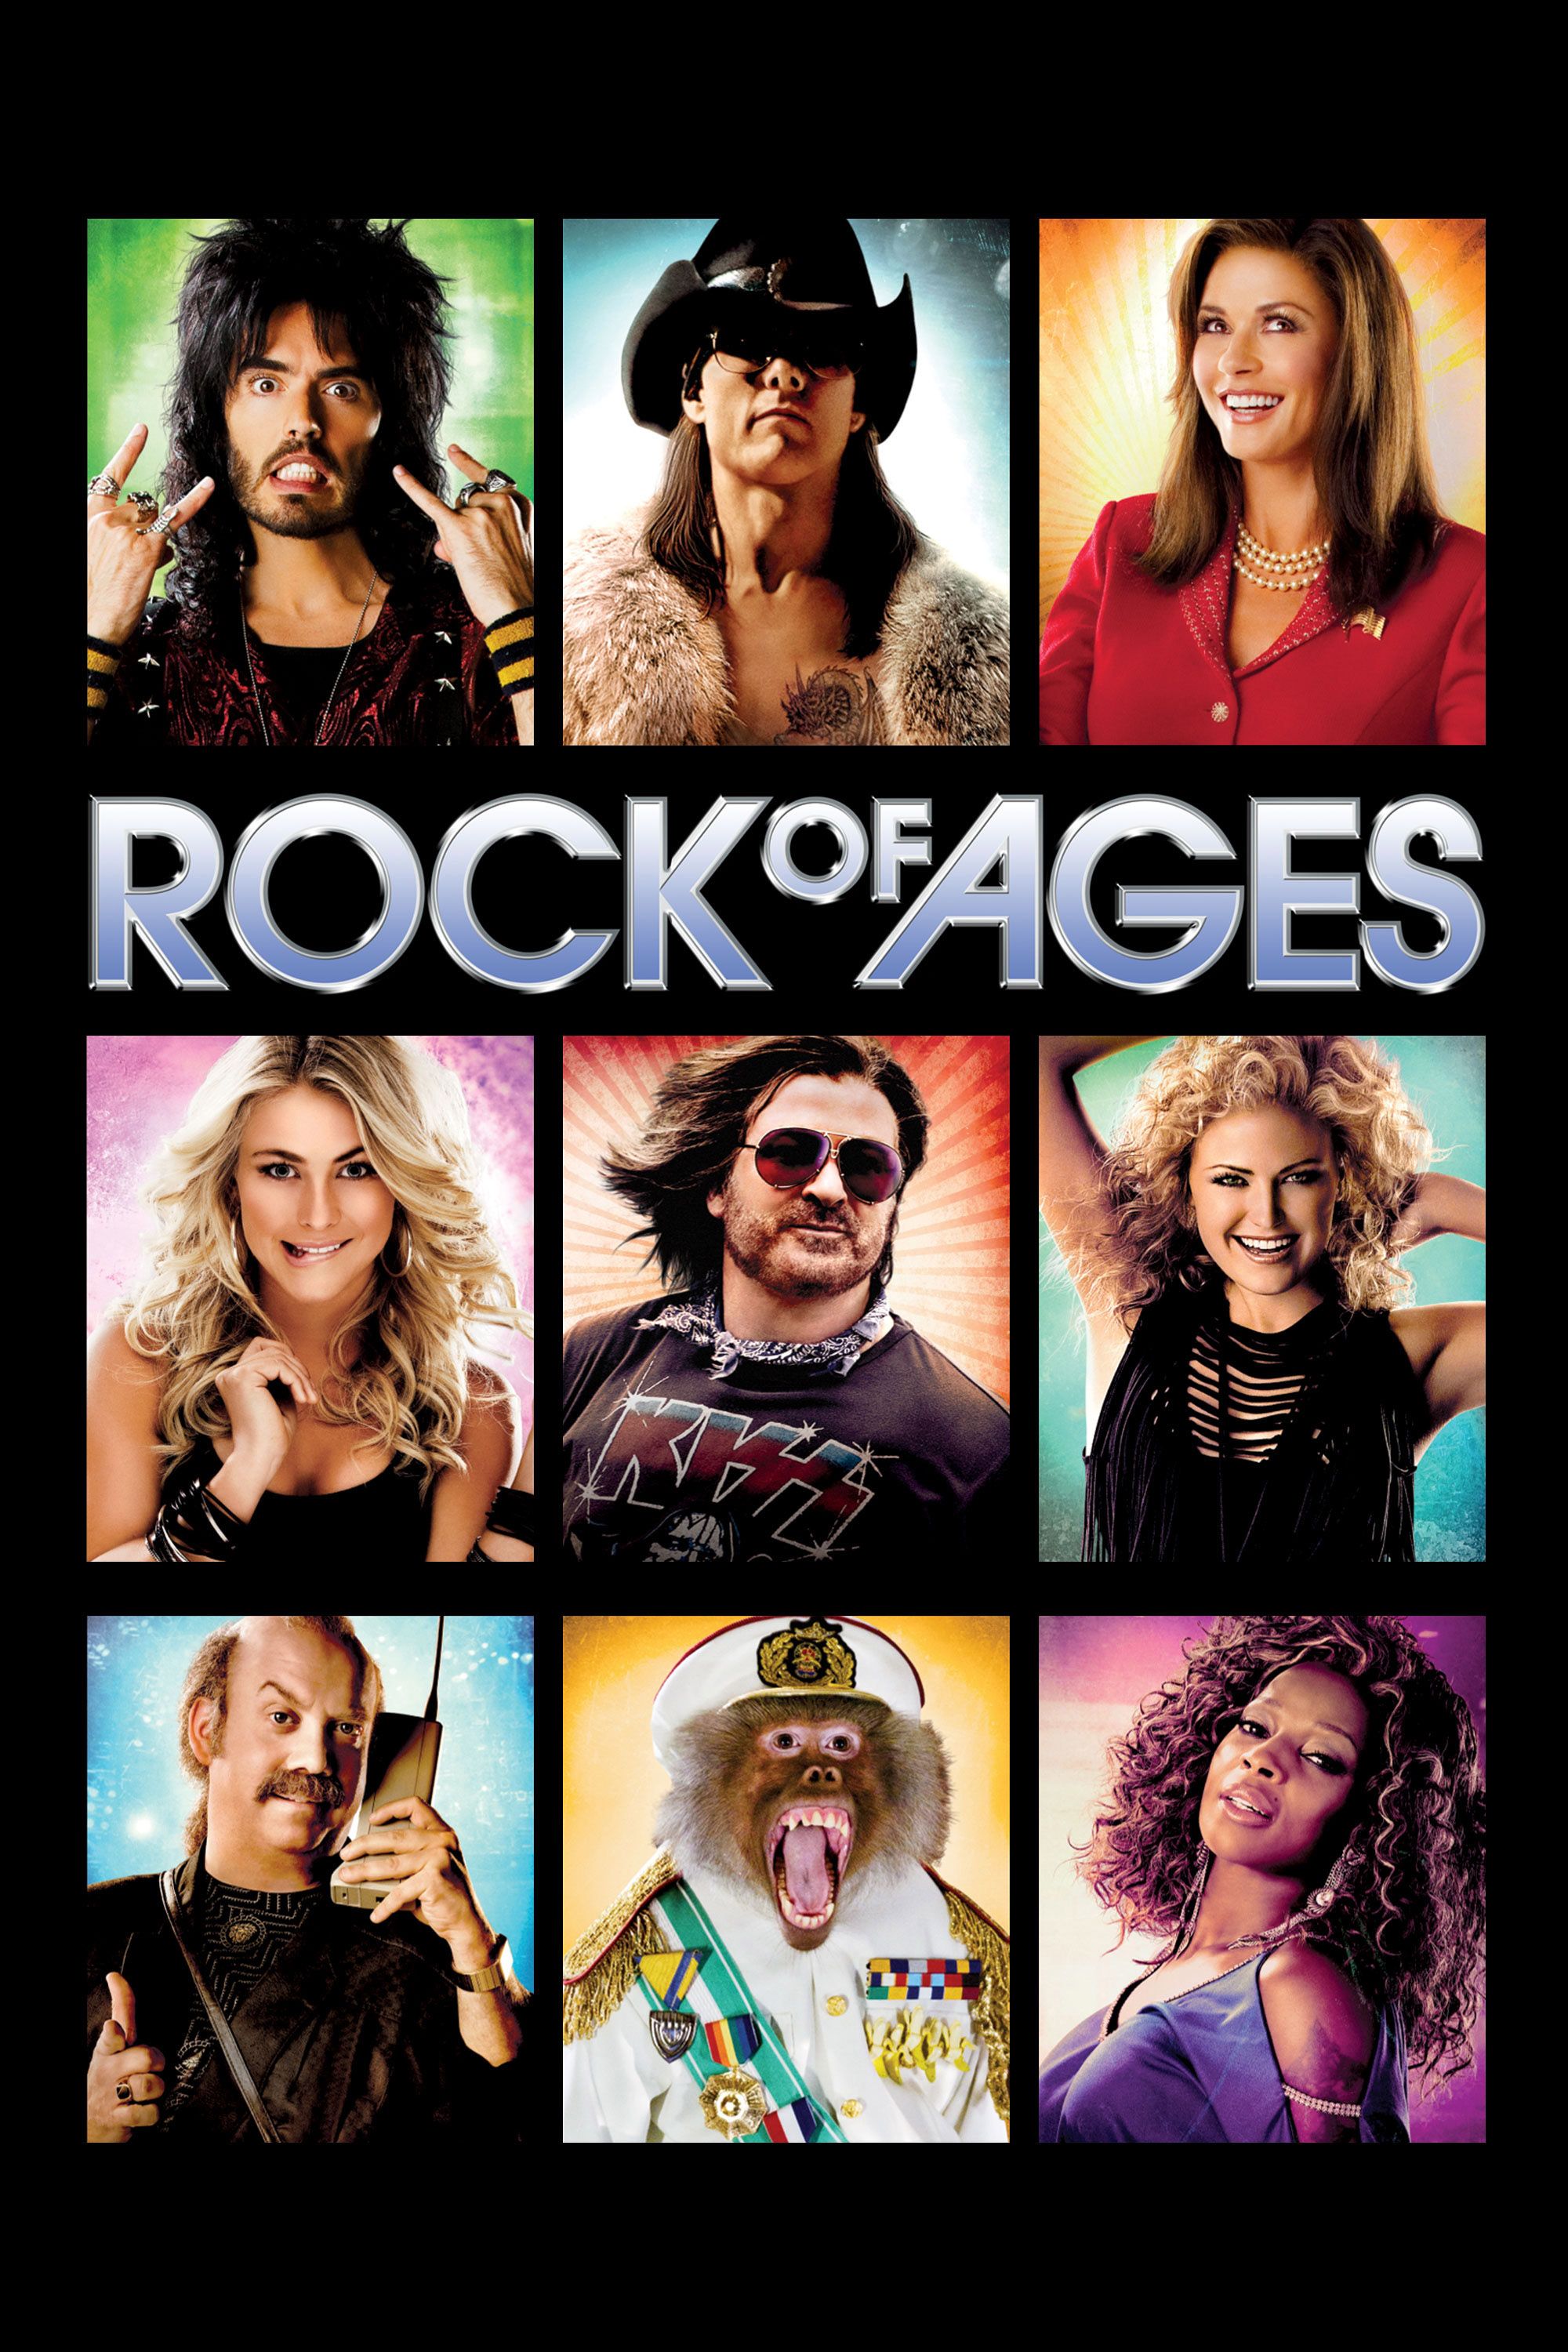 Rock of Ages, Full Movie